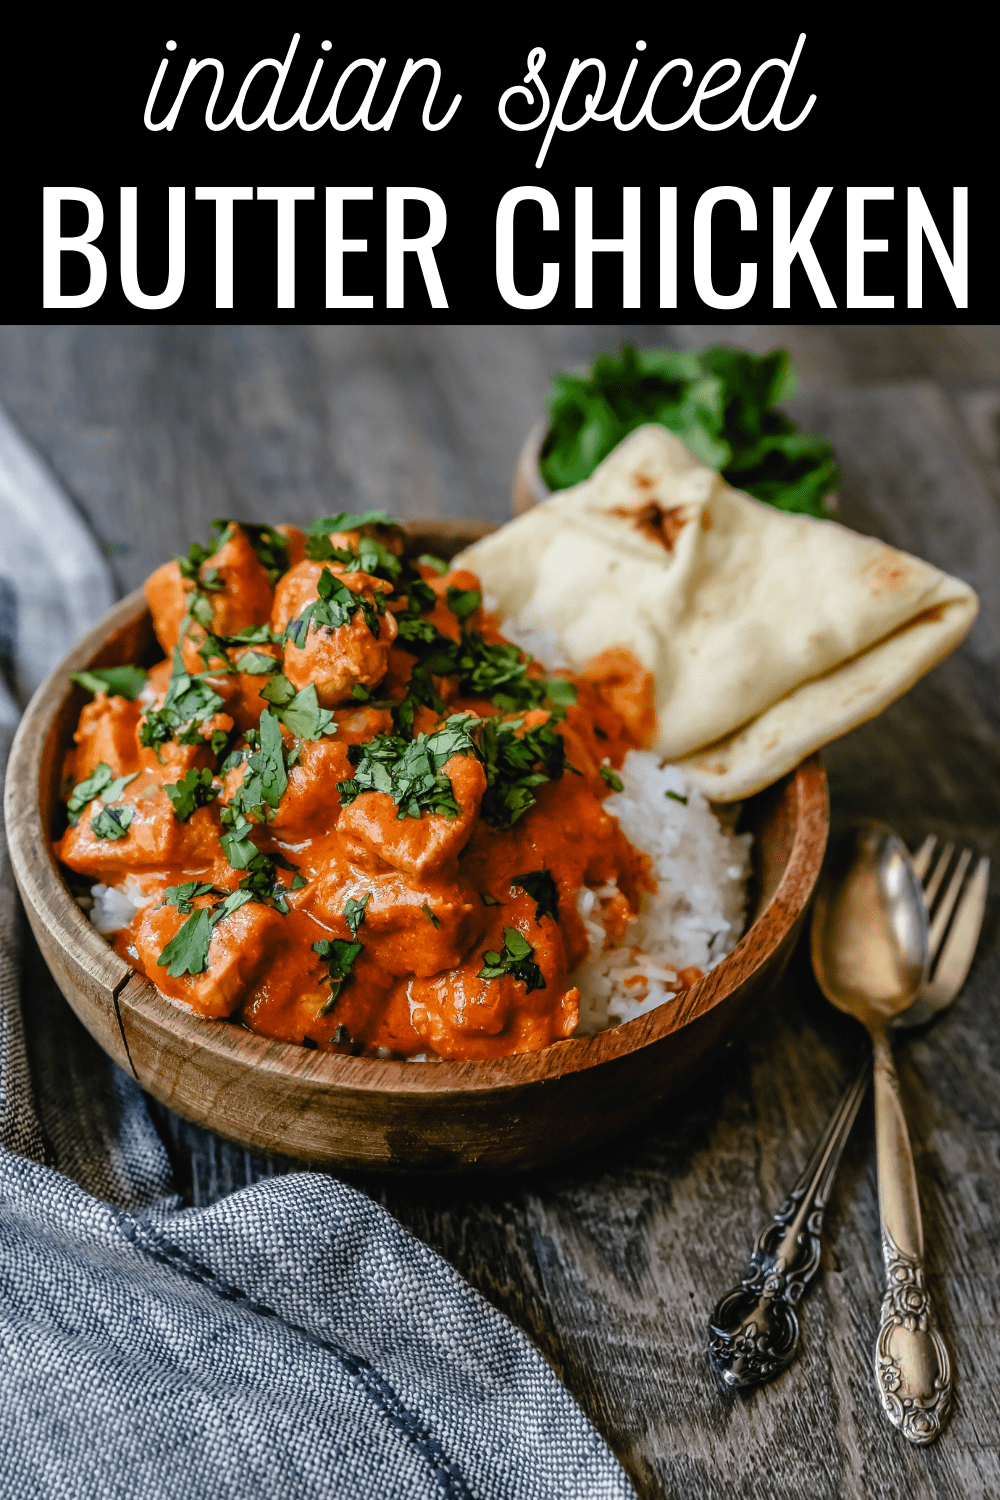 Indian Butter Chicken A popular Indian dish made with tender chicken simmered in a rich, Indian spiced tomato cream sauce. The Best Indian Butter Chicken Recipe! #indianfood #butterchicken 